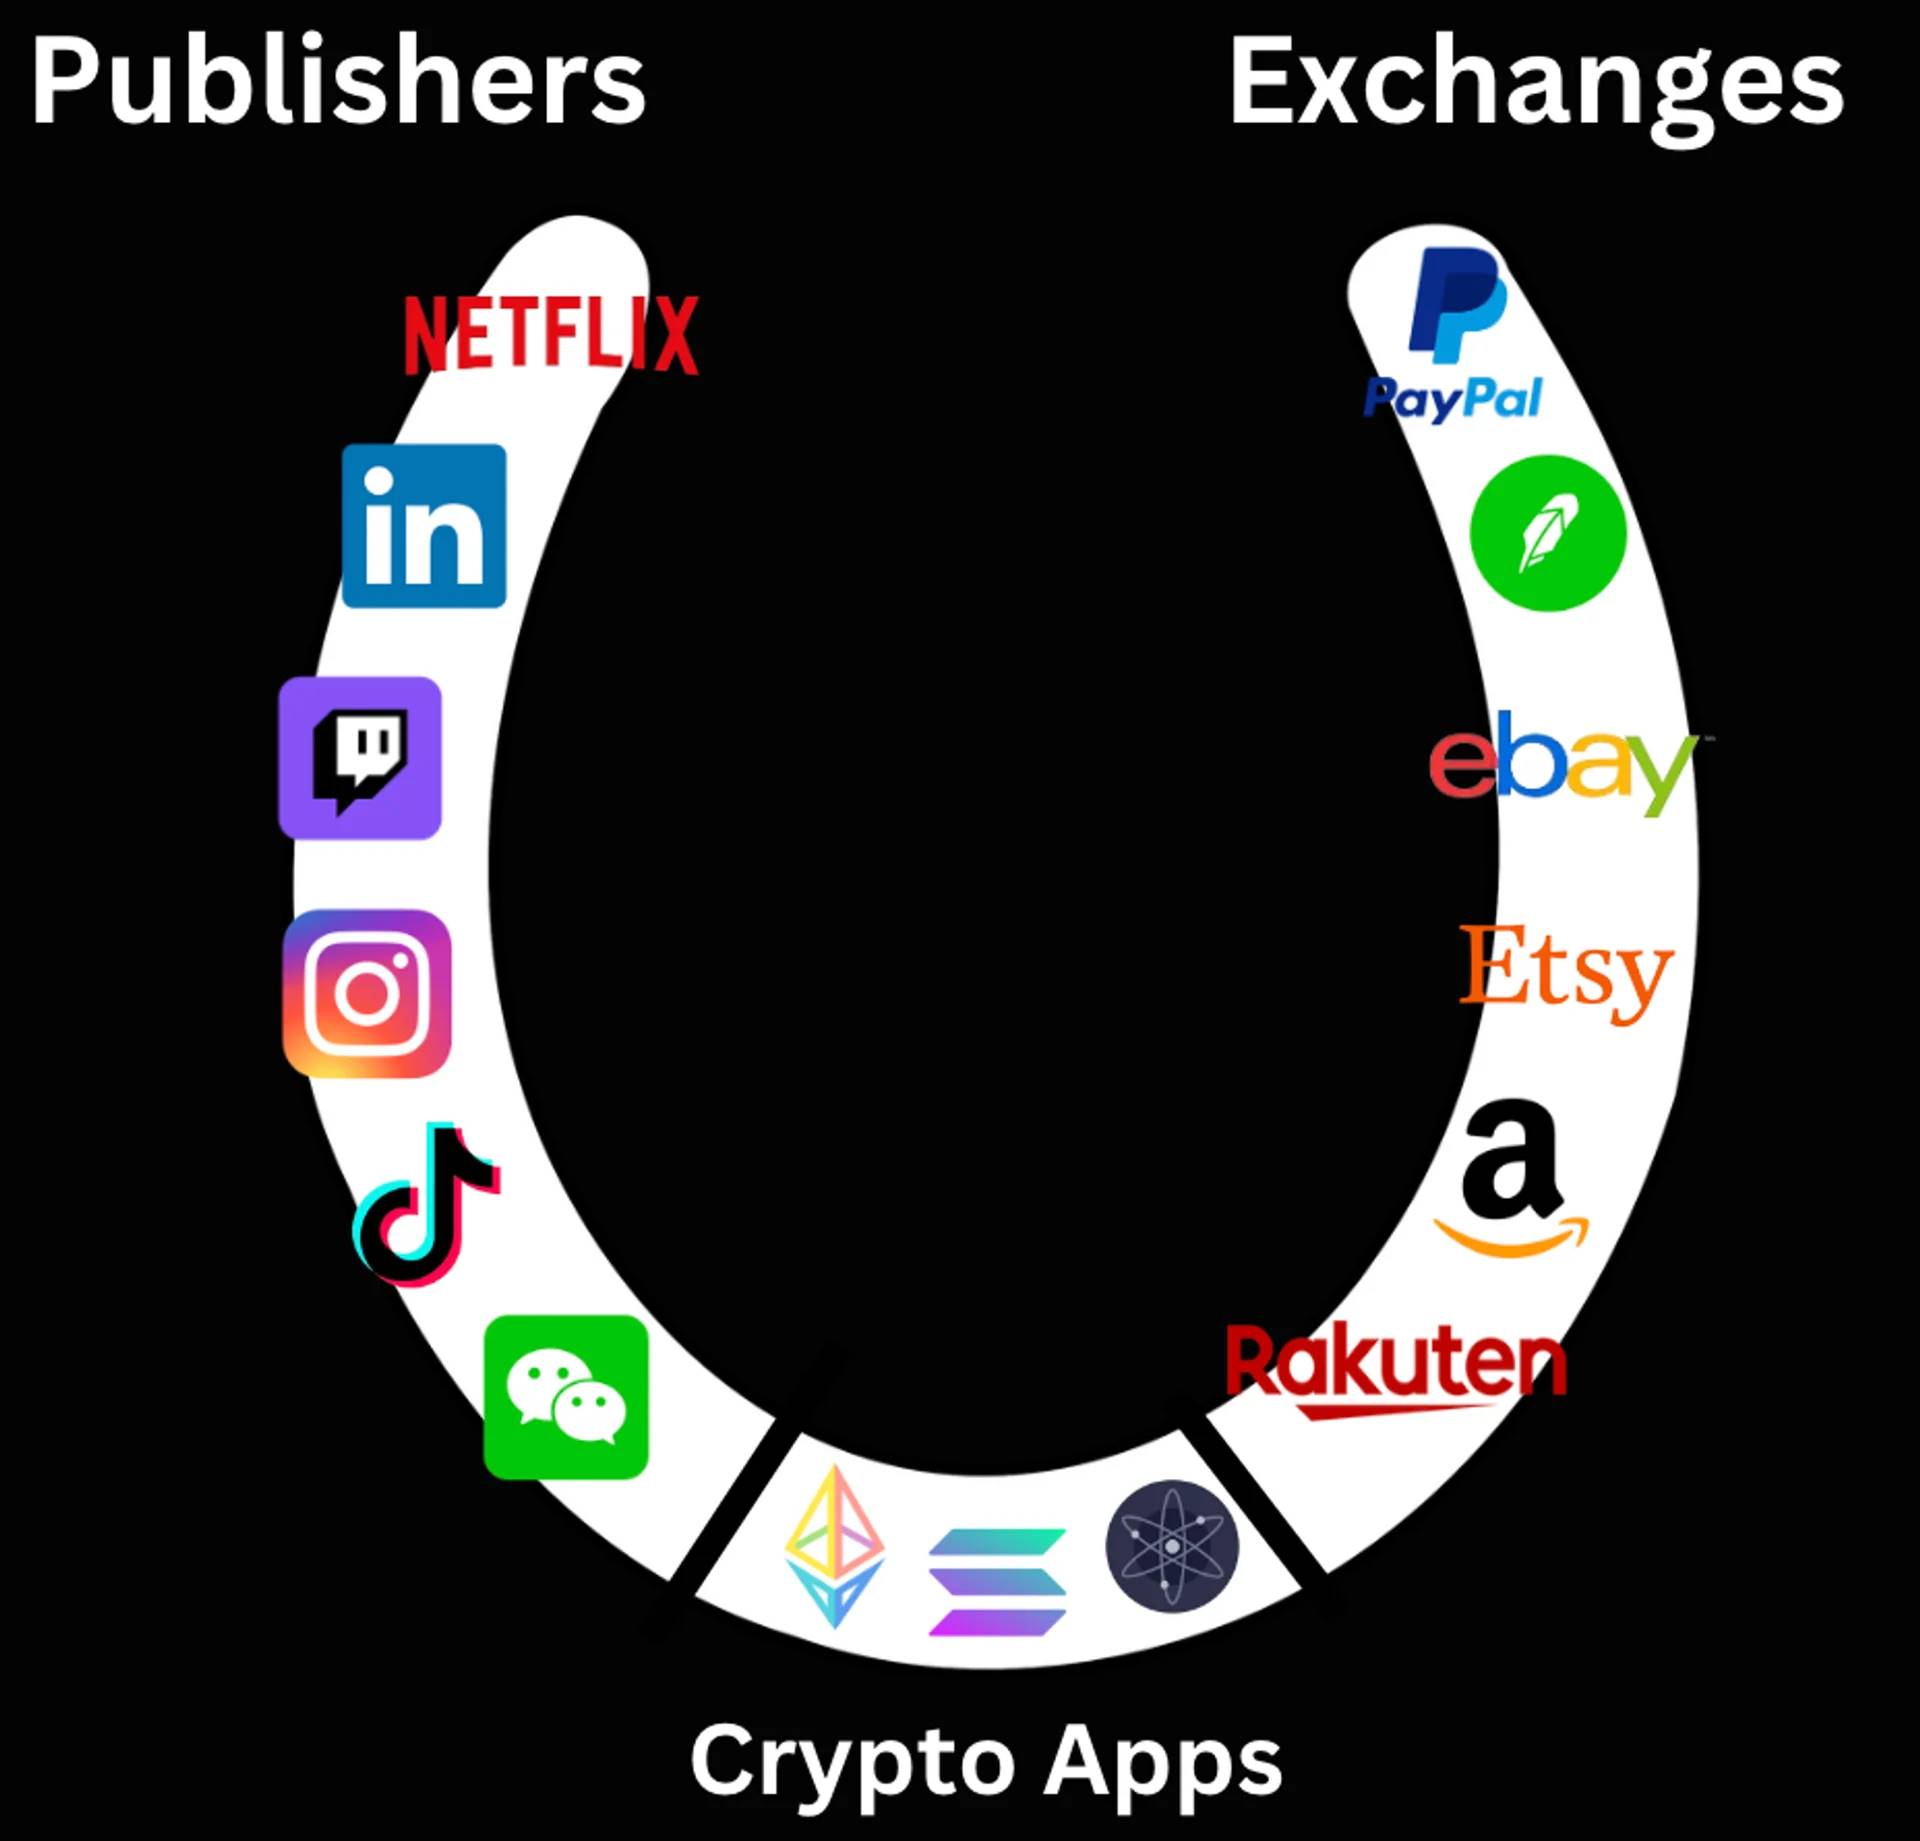 Searching for the next crypto killer app: the combination of content publishers and exchanges